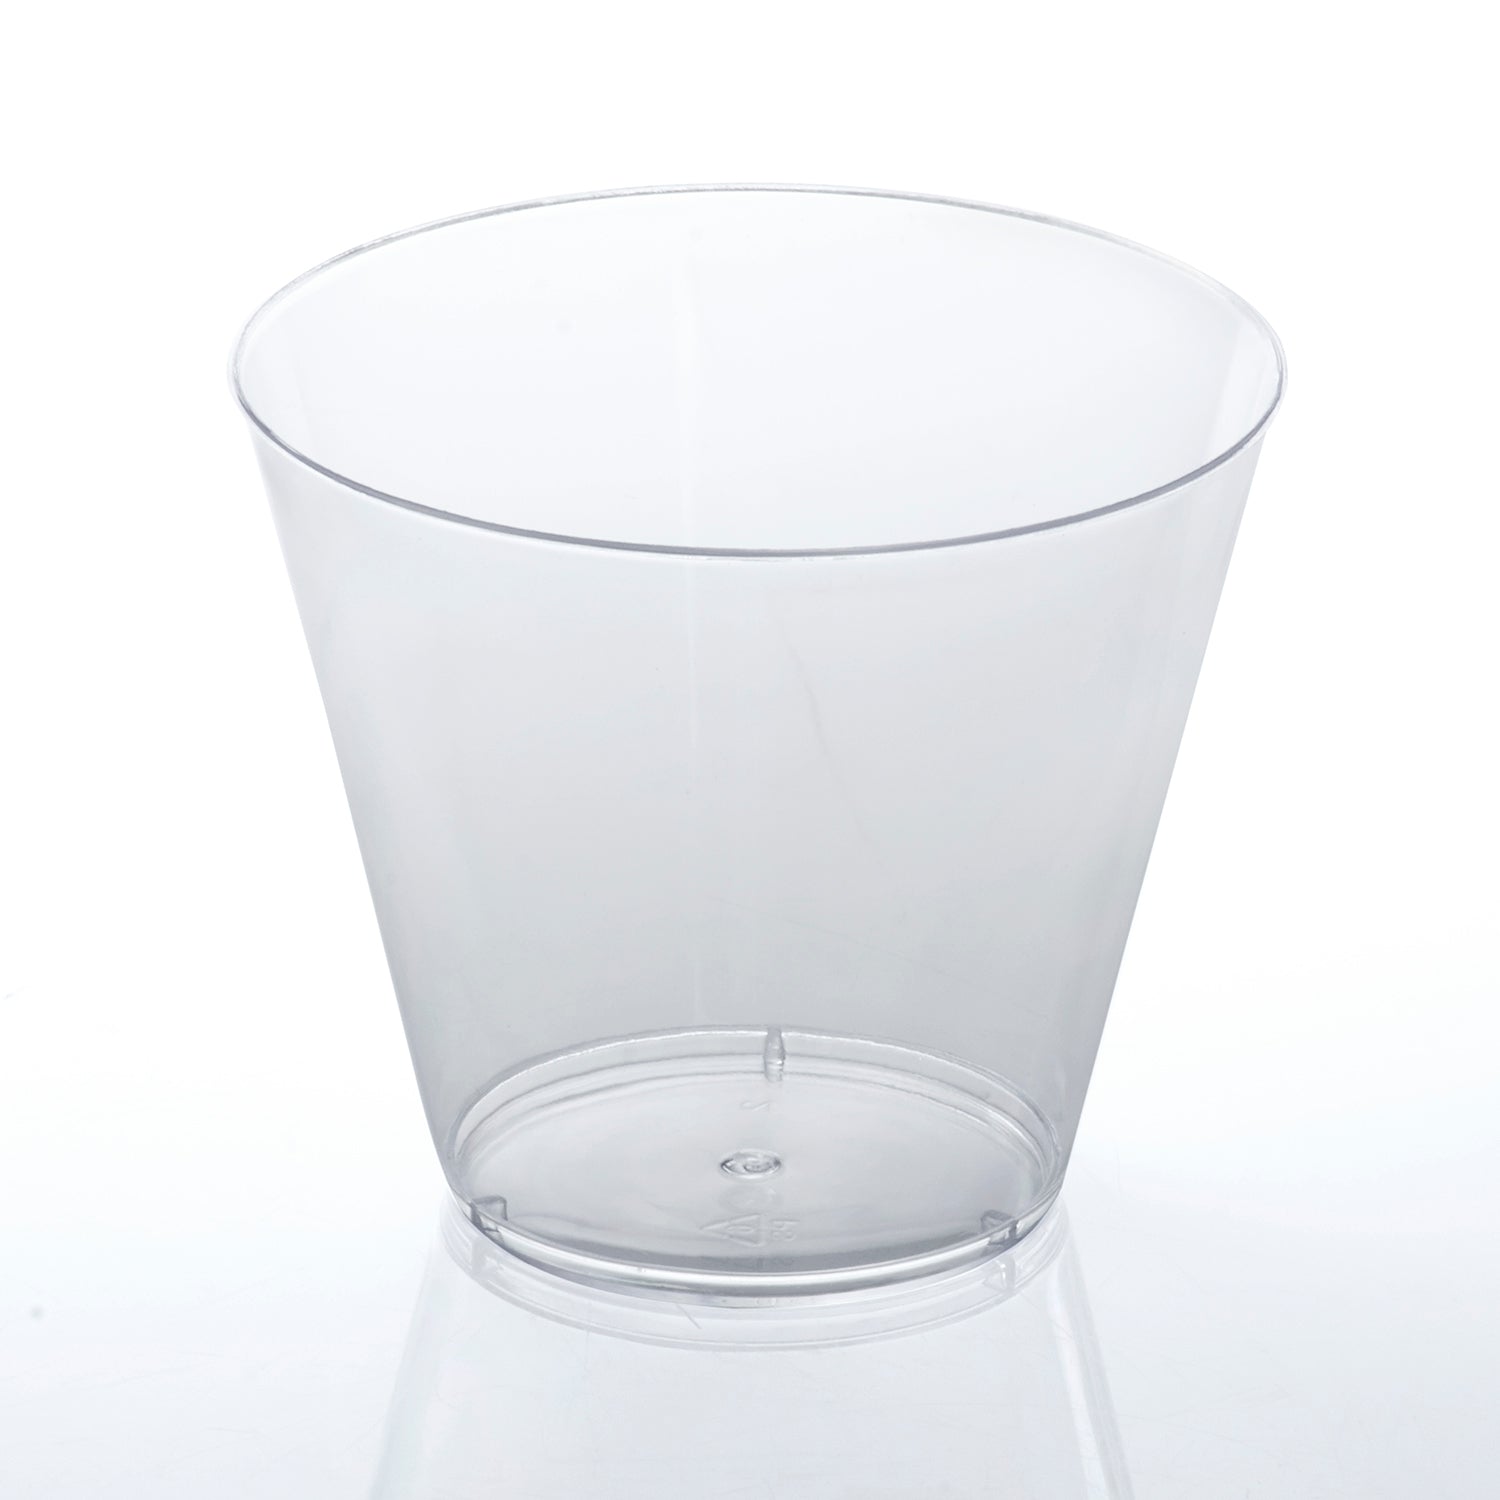 9 oz. Plastic Cups - Old Fashioned style cups 200 ct.